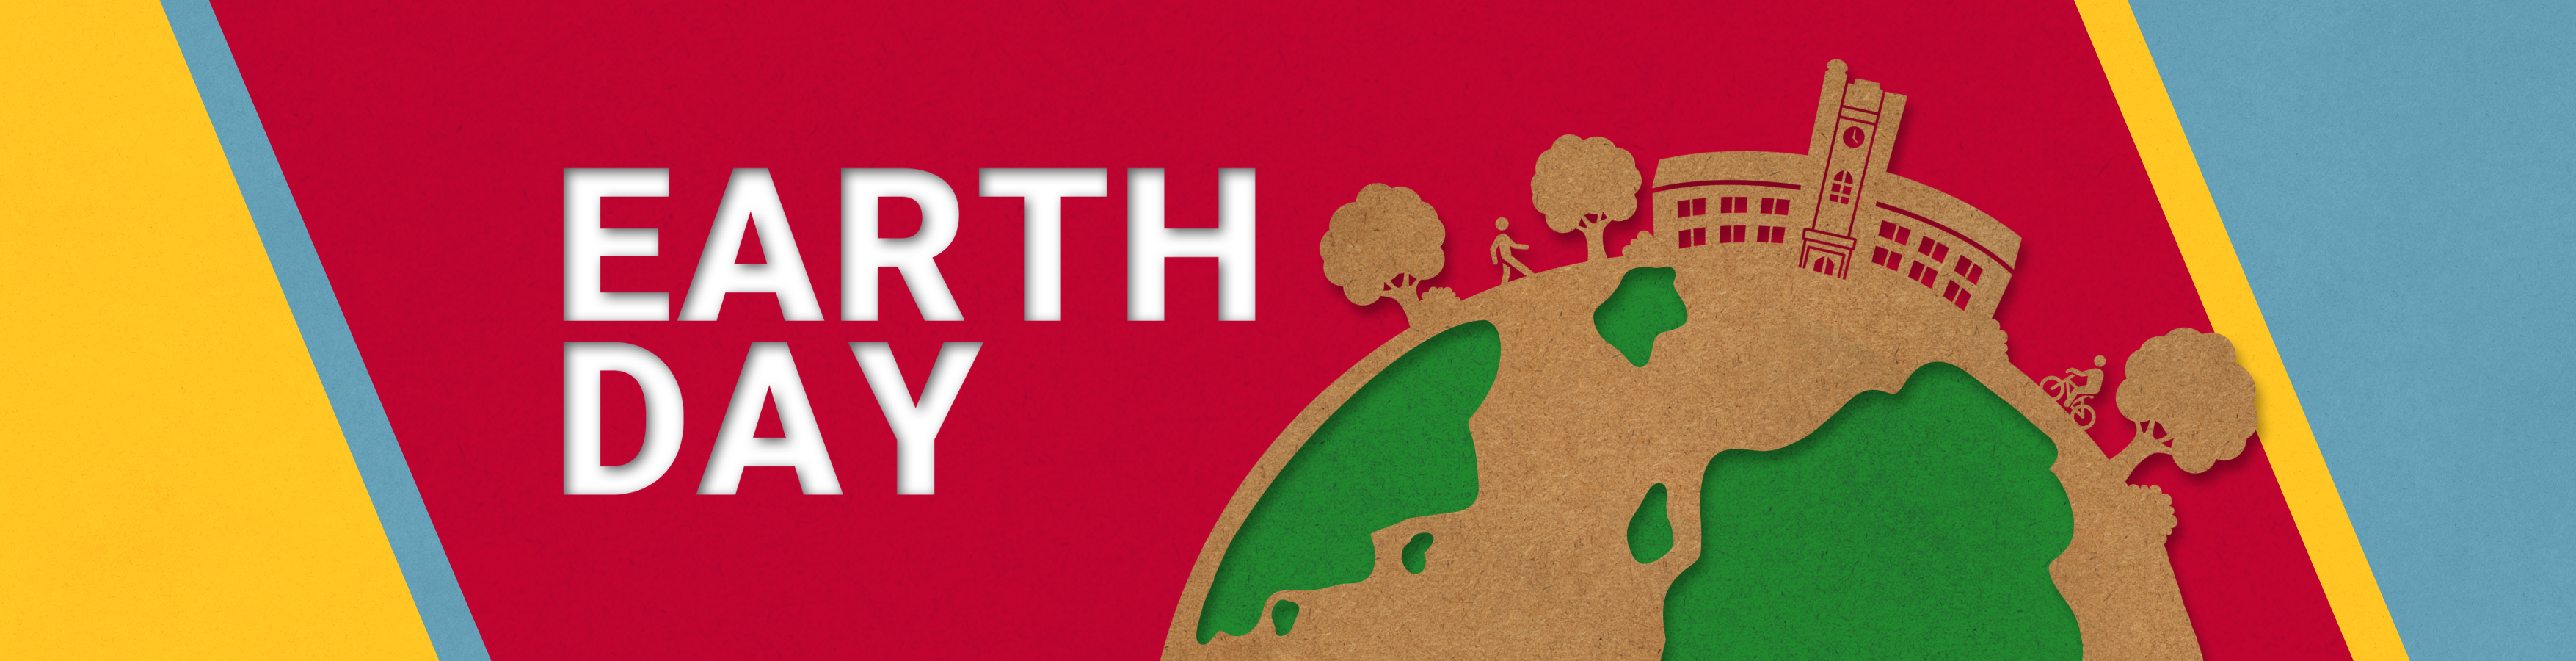 Earth Day. A cork graphic of the Earth.